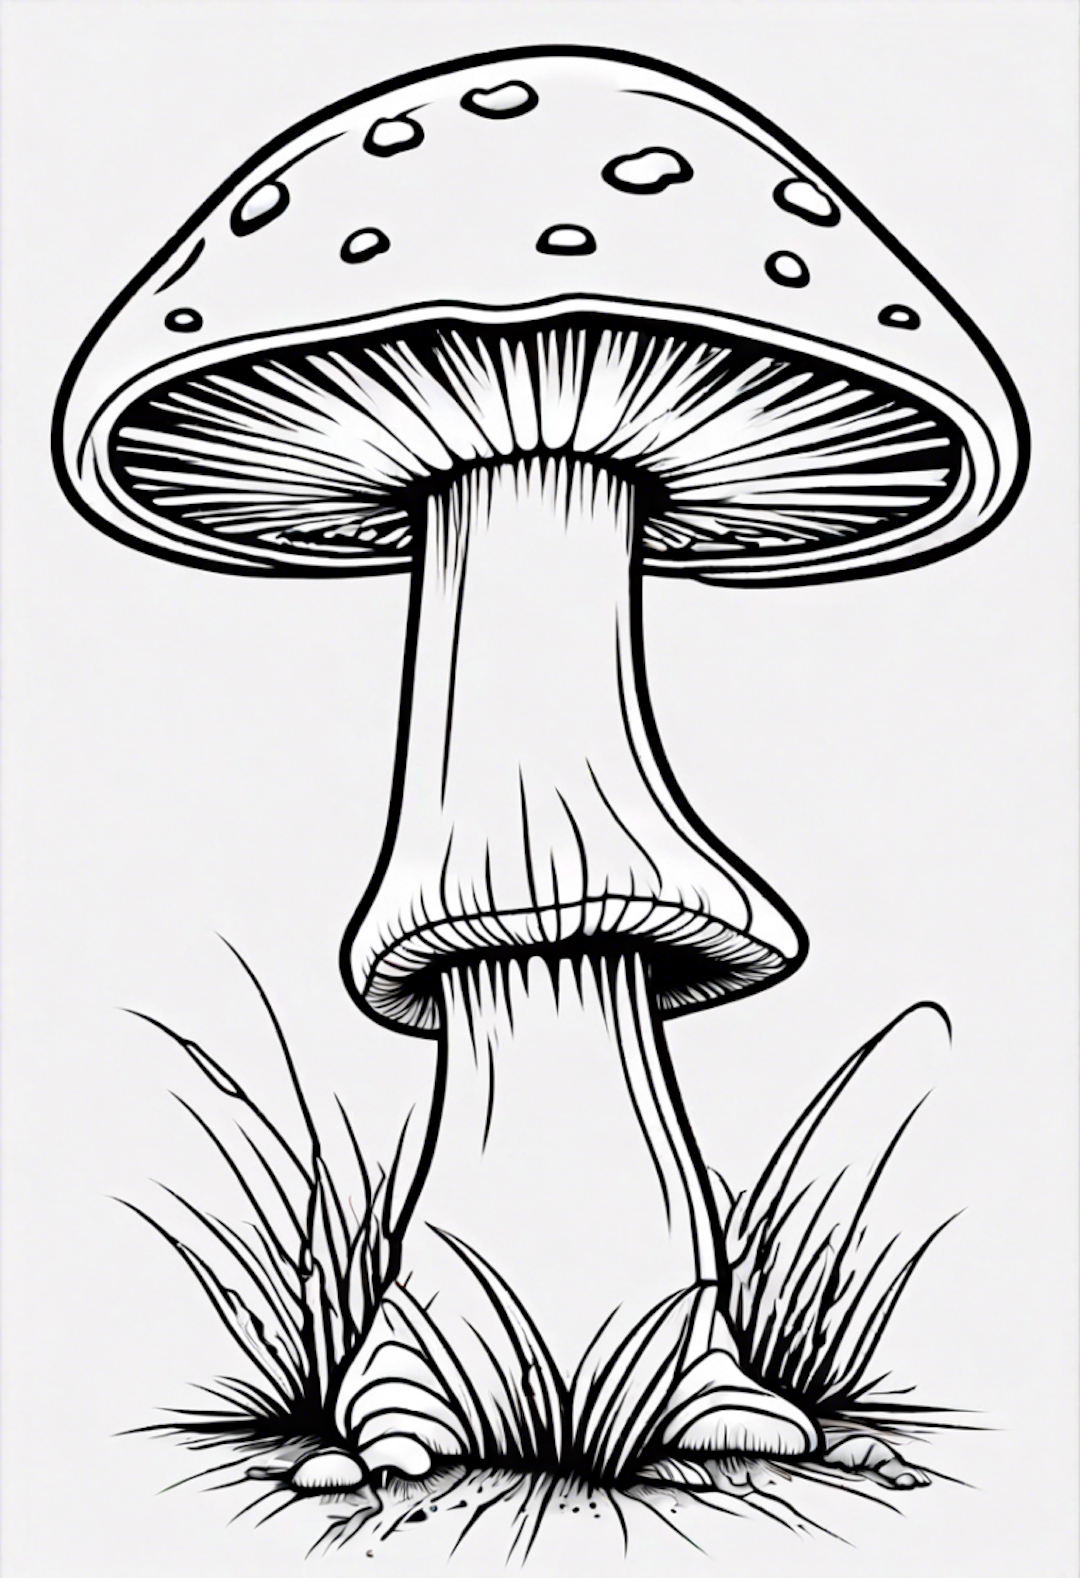 Magical Mushroom in the Forest coloring pages